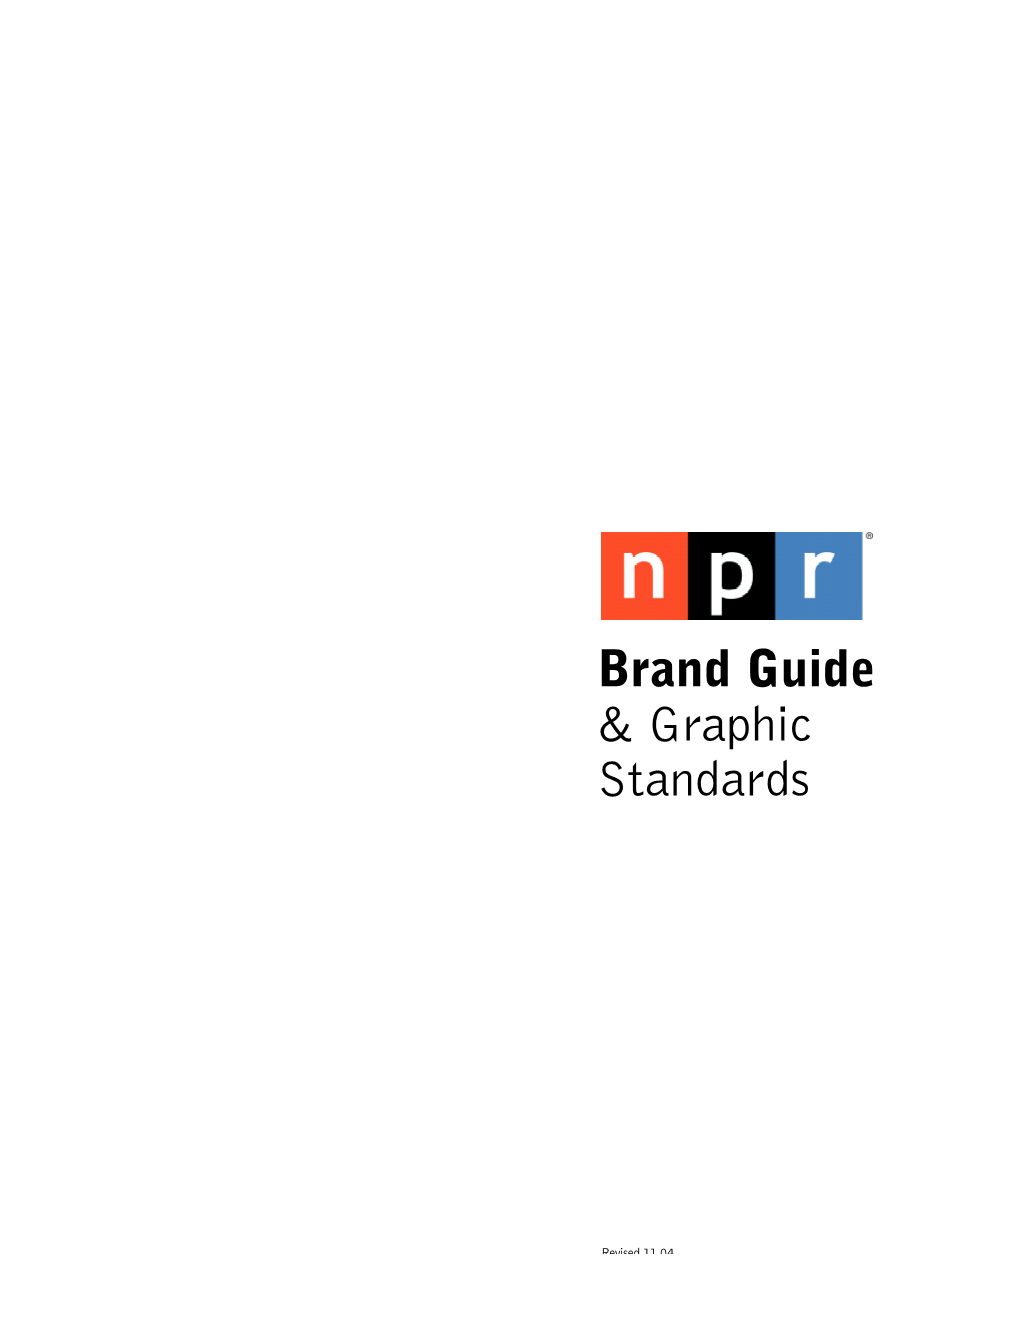 Brand Guide & Graphic Standards